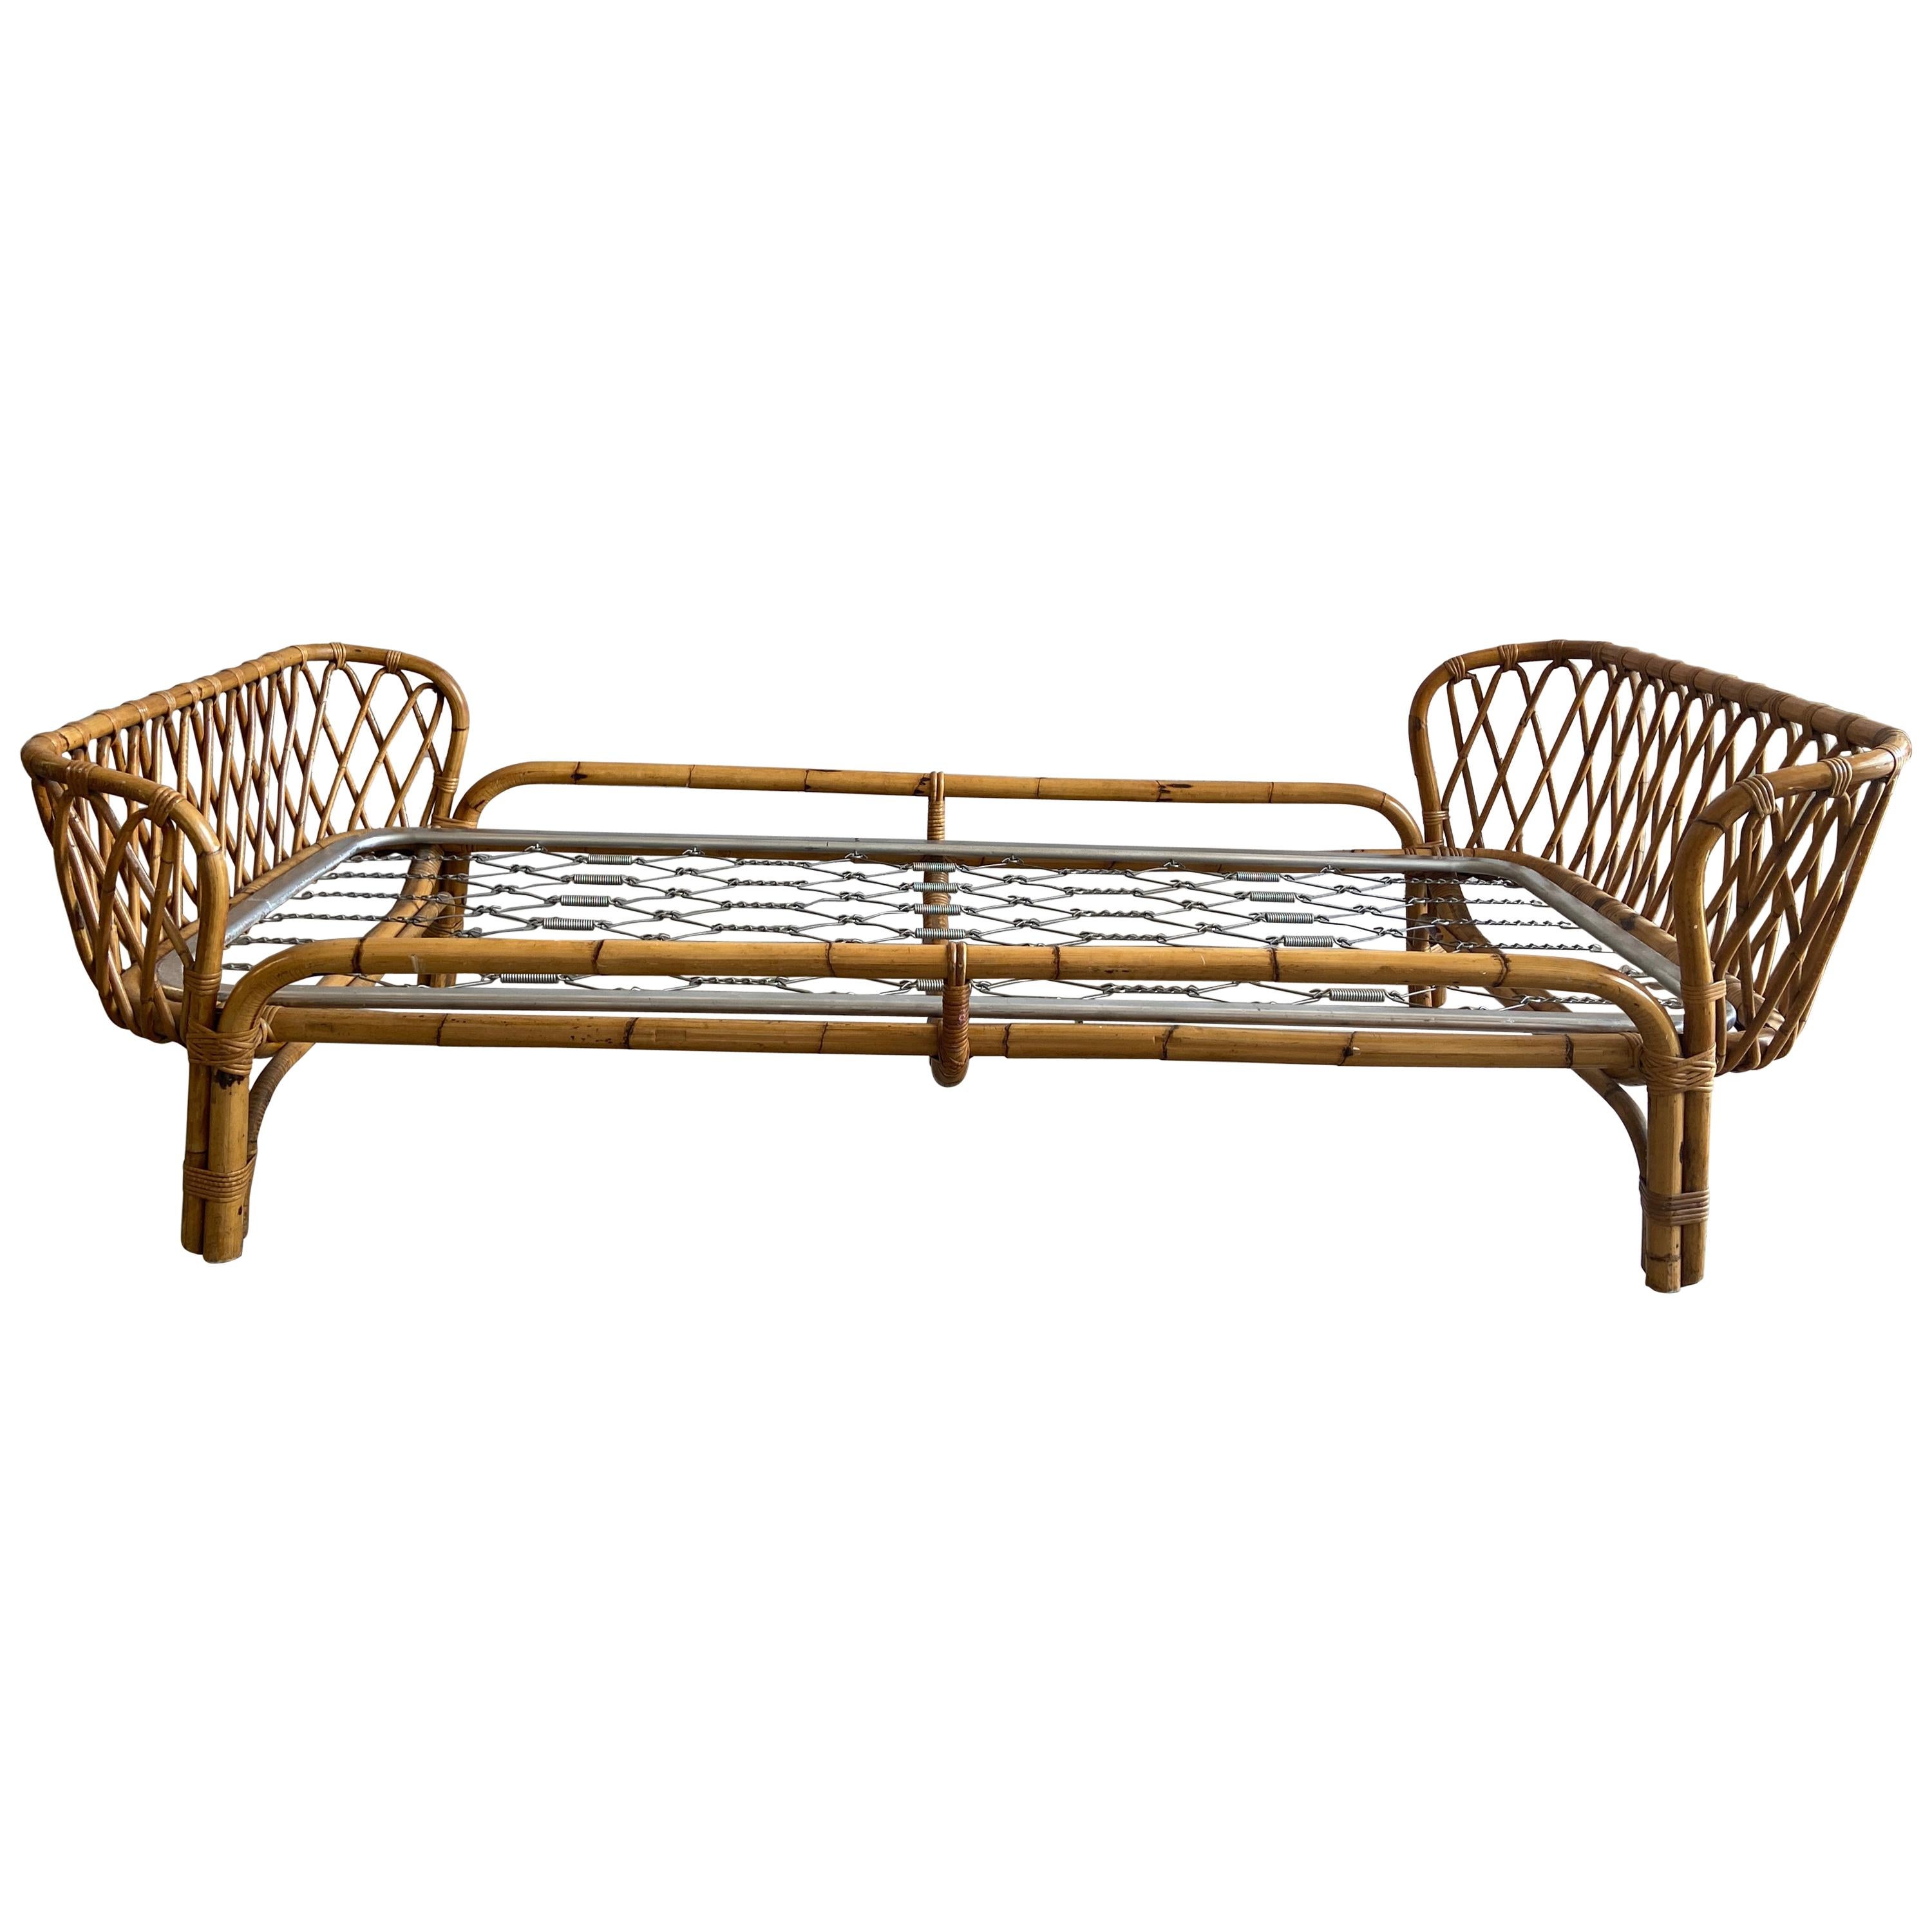 Rattan Twin Bed 1960s At 1stdibs, Rattan Twin Bed